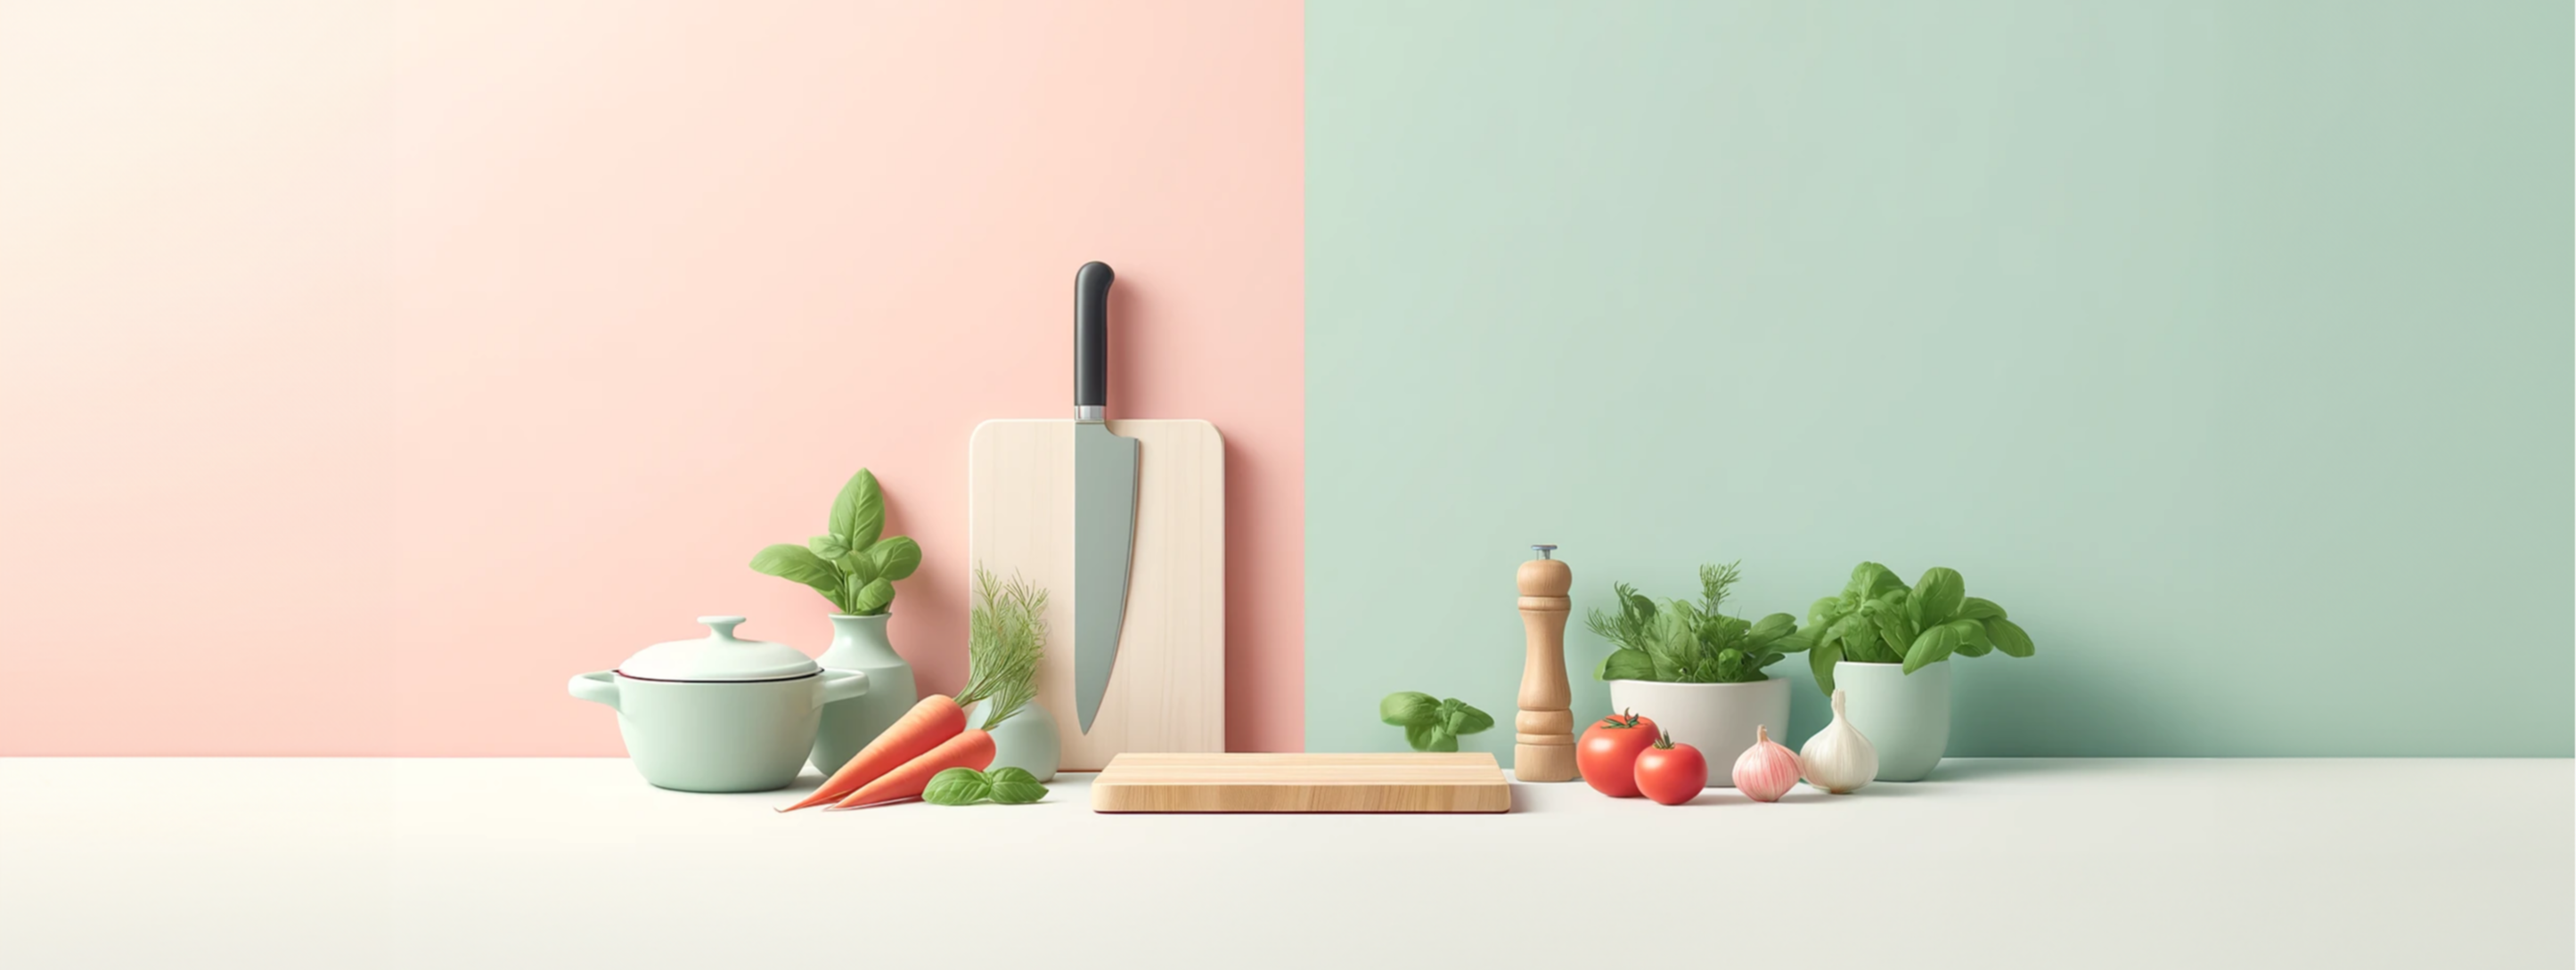 A minimalistic illustration for a food blog banner, featuring a pastel pink or mint green background. The image includes a modern, clean kitchen count